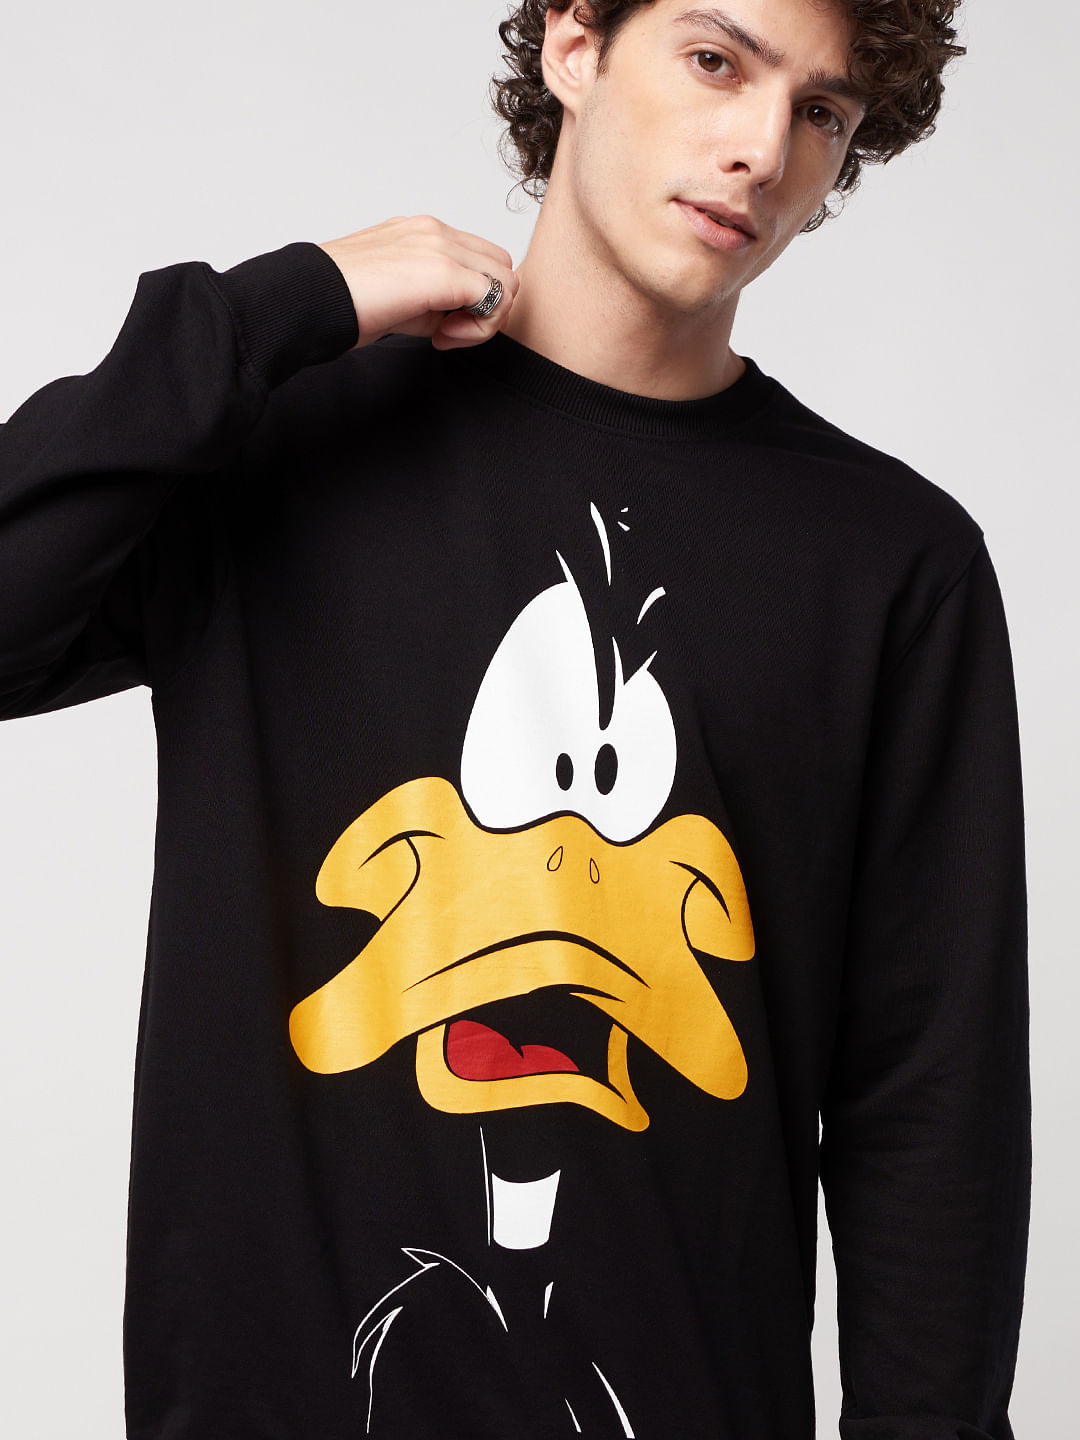 Buy Looney Tunes: Daffy Duck Sweatshirts online at The Souled Store.